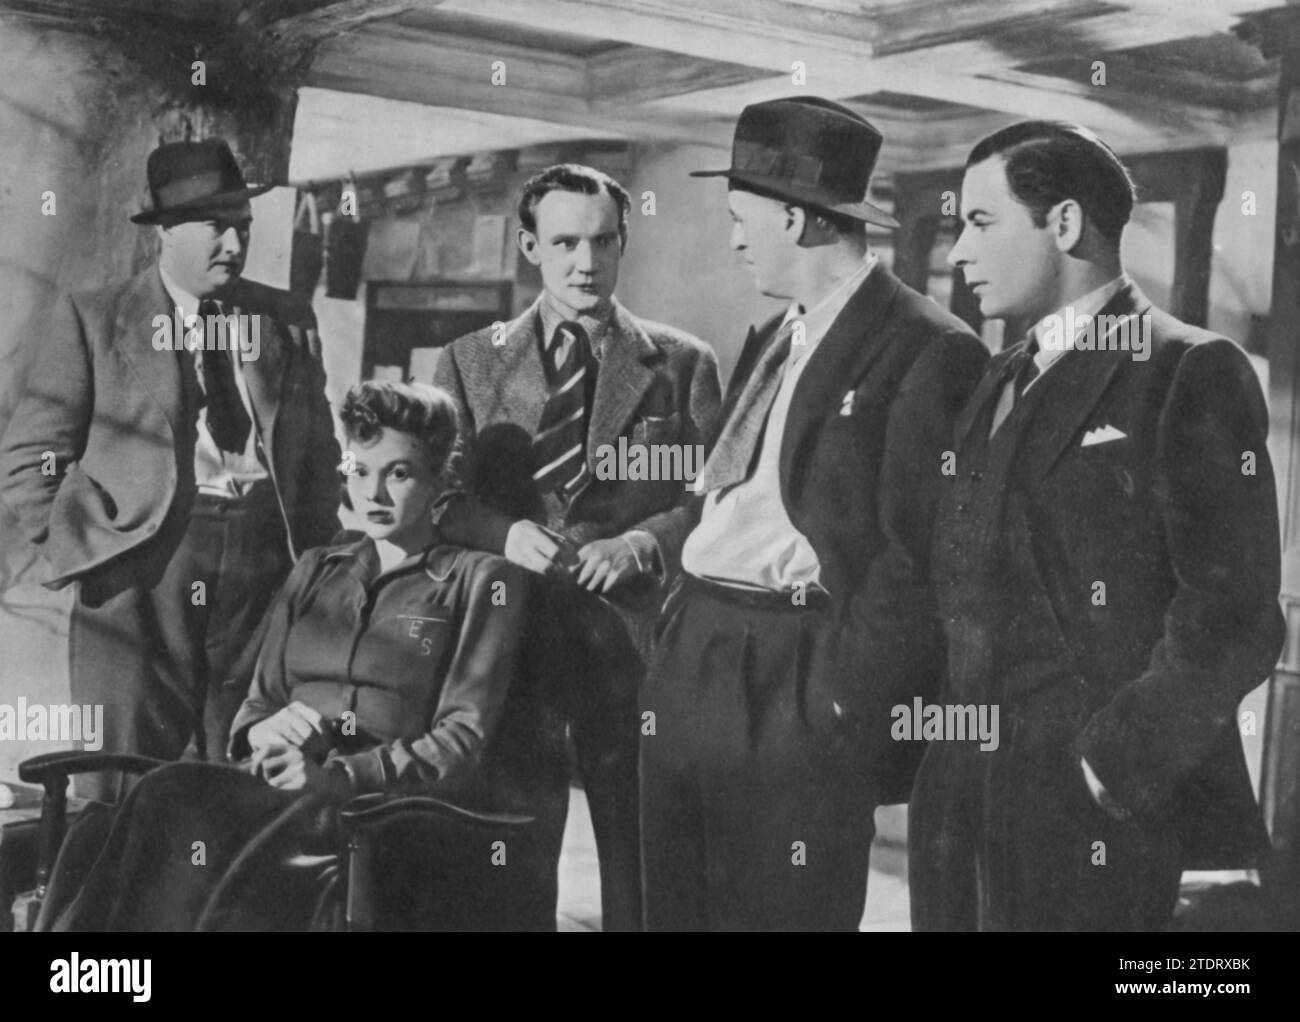 George Woodbridge, Alastair Sim, Rosamund John, Trevor Howard, and Leo Genn come together in the classic British thriller 'Green for Danger' (1946). Set in a wartime hospital, the film is a masterful blend of suspense and dark humor. Alastair Sim, in a standout performance, plays the astute Inspector Cockrill, who investigates mysterious deaths at the hospital. The ensemble cast, including John, Howard, and Genn, adds to the intrigue and complexity of the plot, making 'Green for Danger' a memorable and engaging mystery film. Stock Photo